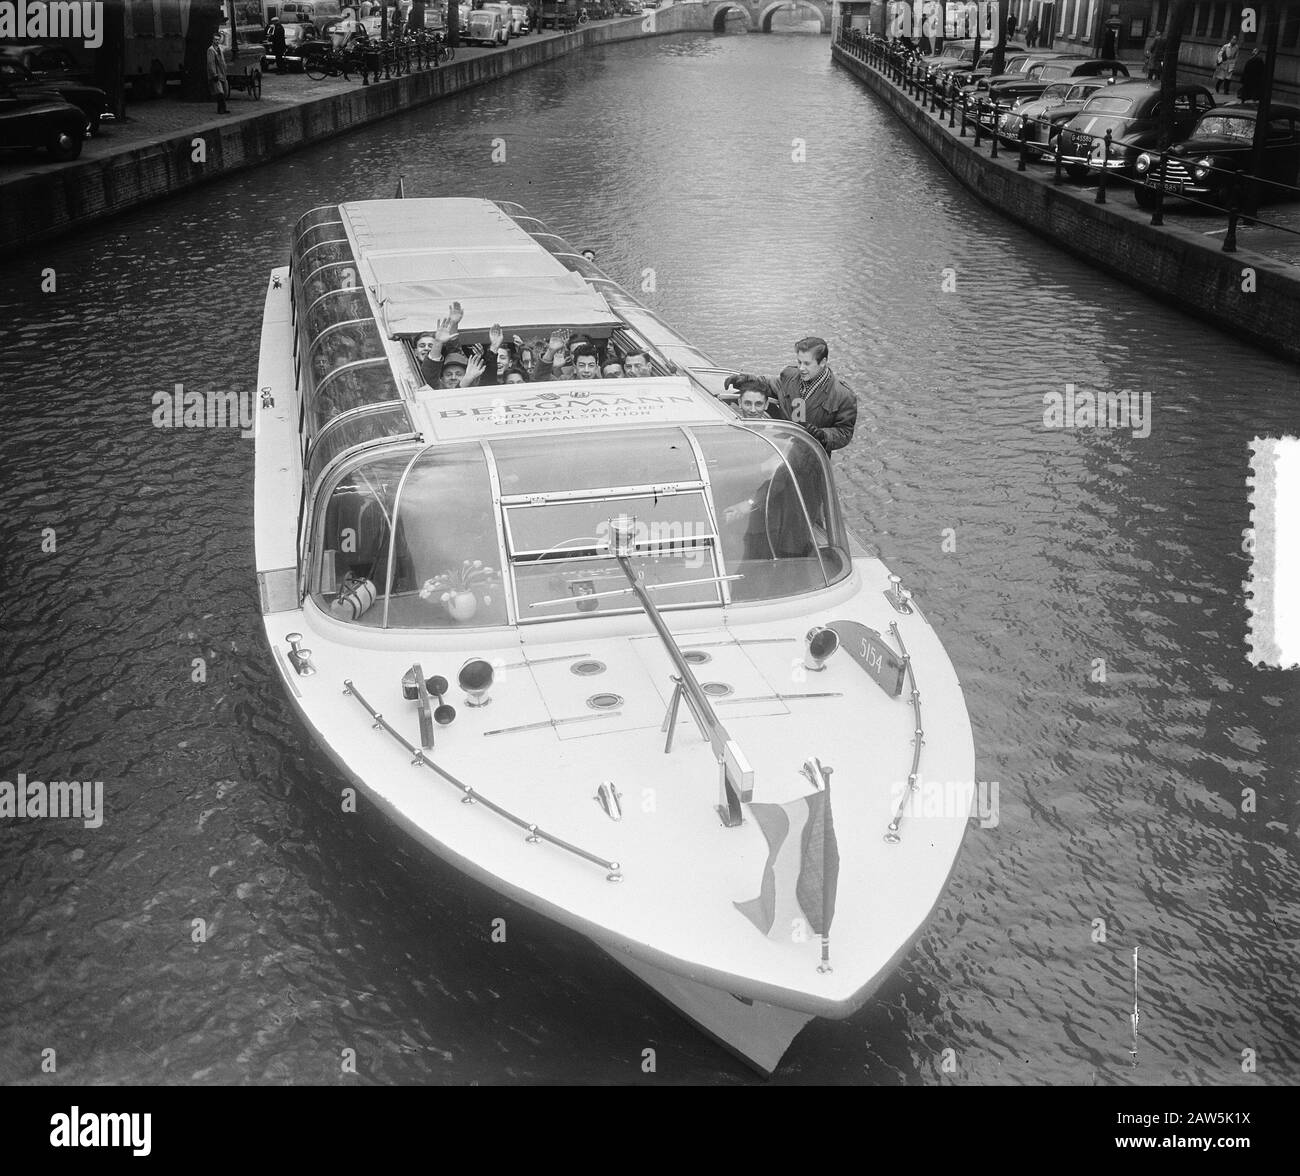 Parisian children have money from Disaster to Mayor of Amsterdam. Roundtrip Date: April 1, 1953 Location: Amsterdam, Noord-Holland Keywords: mayors, children, excursion boats Stock Photo